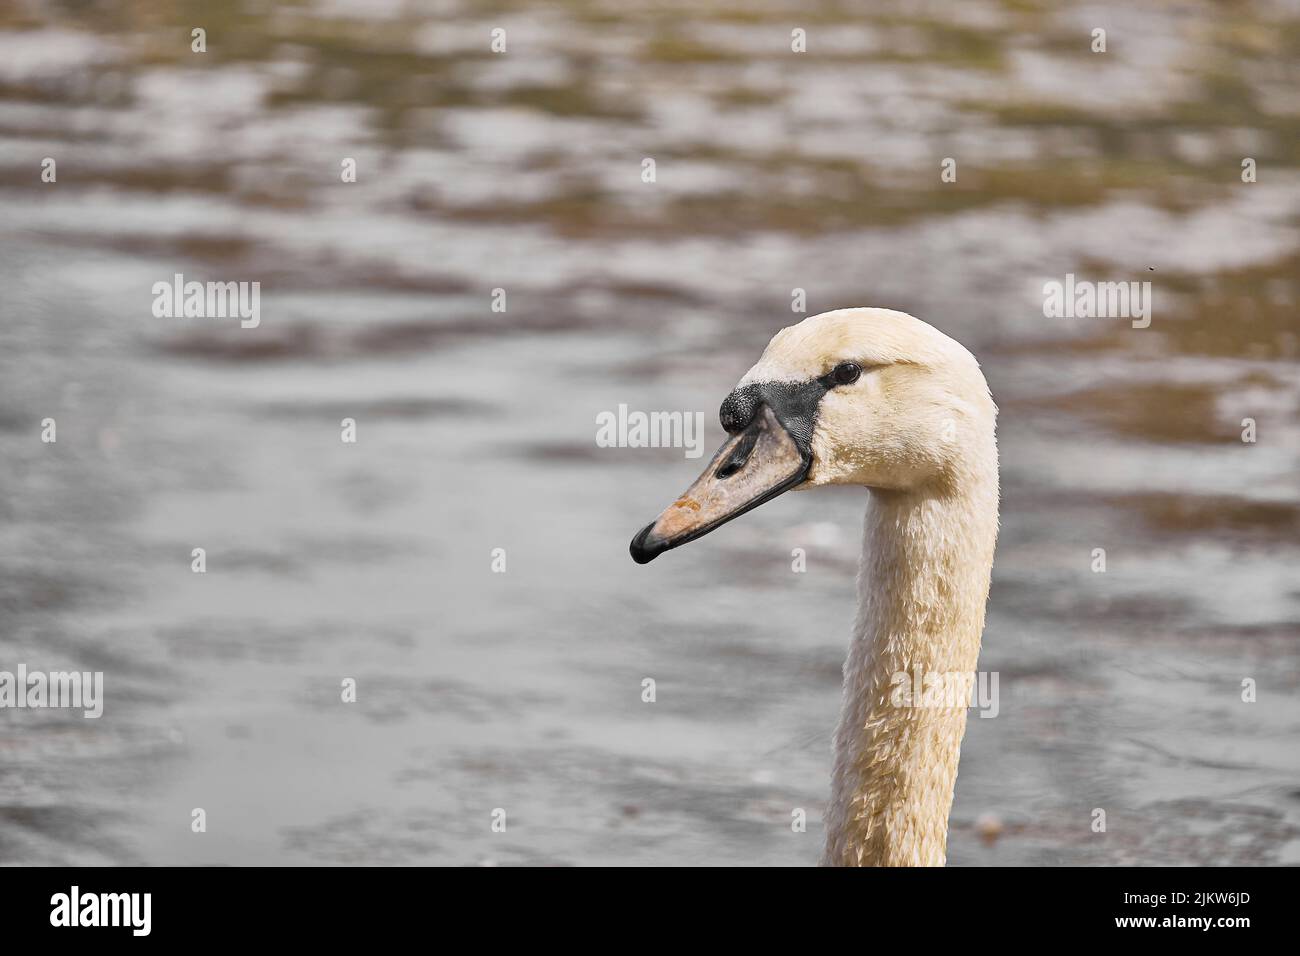 A selective focus shot of a neck of a swan against the water Stock Photo